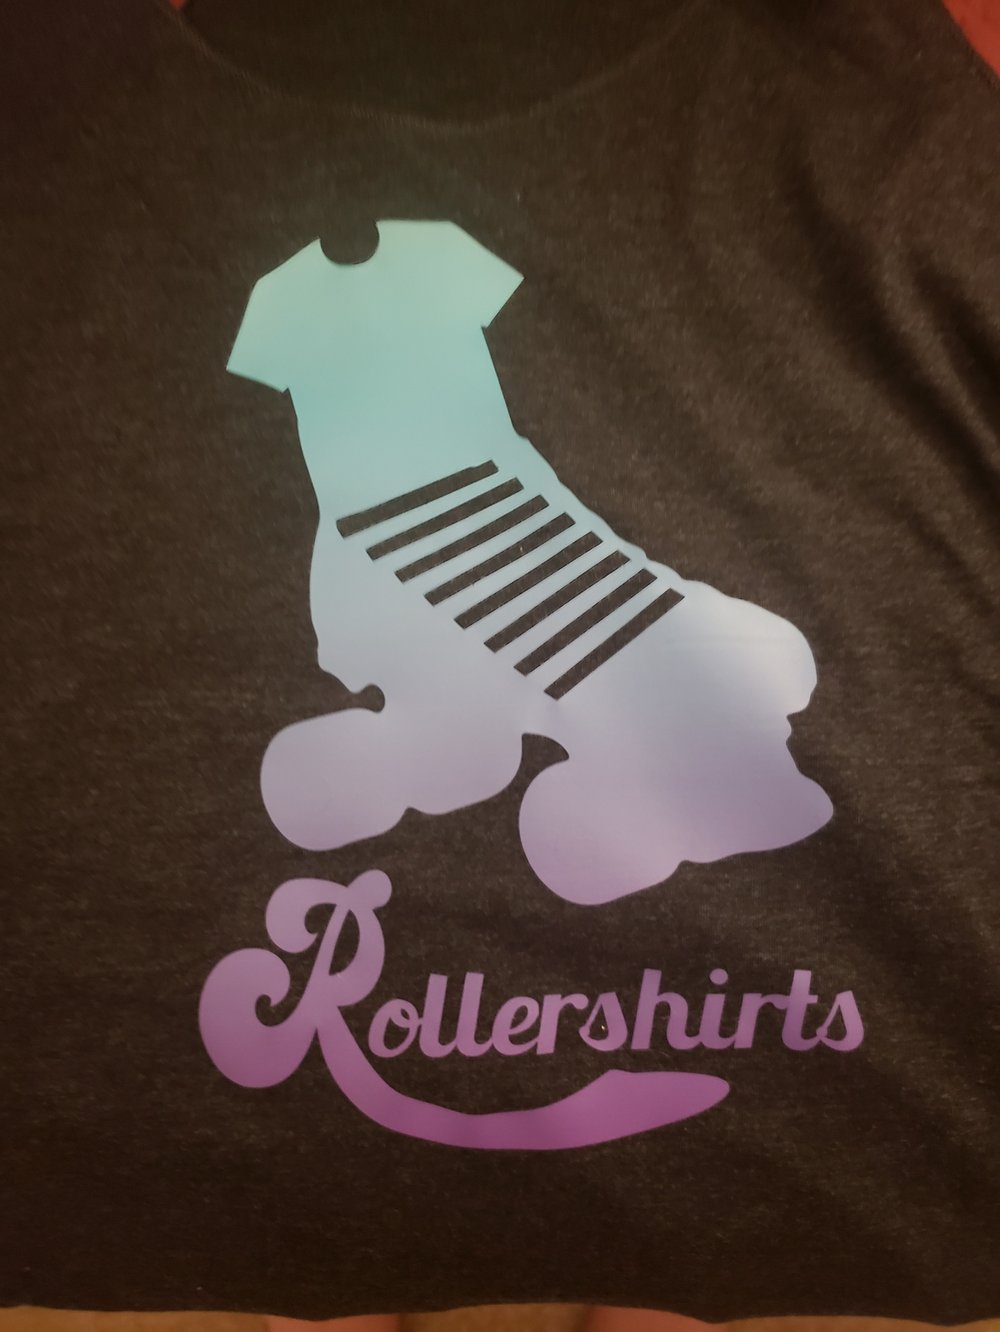 The Rollershirt